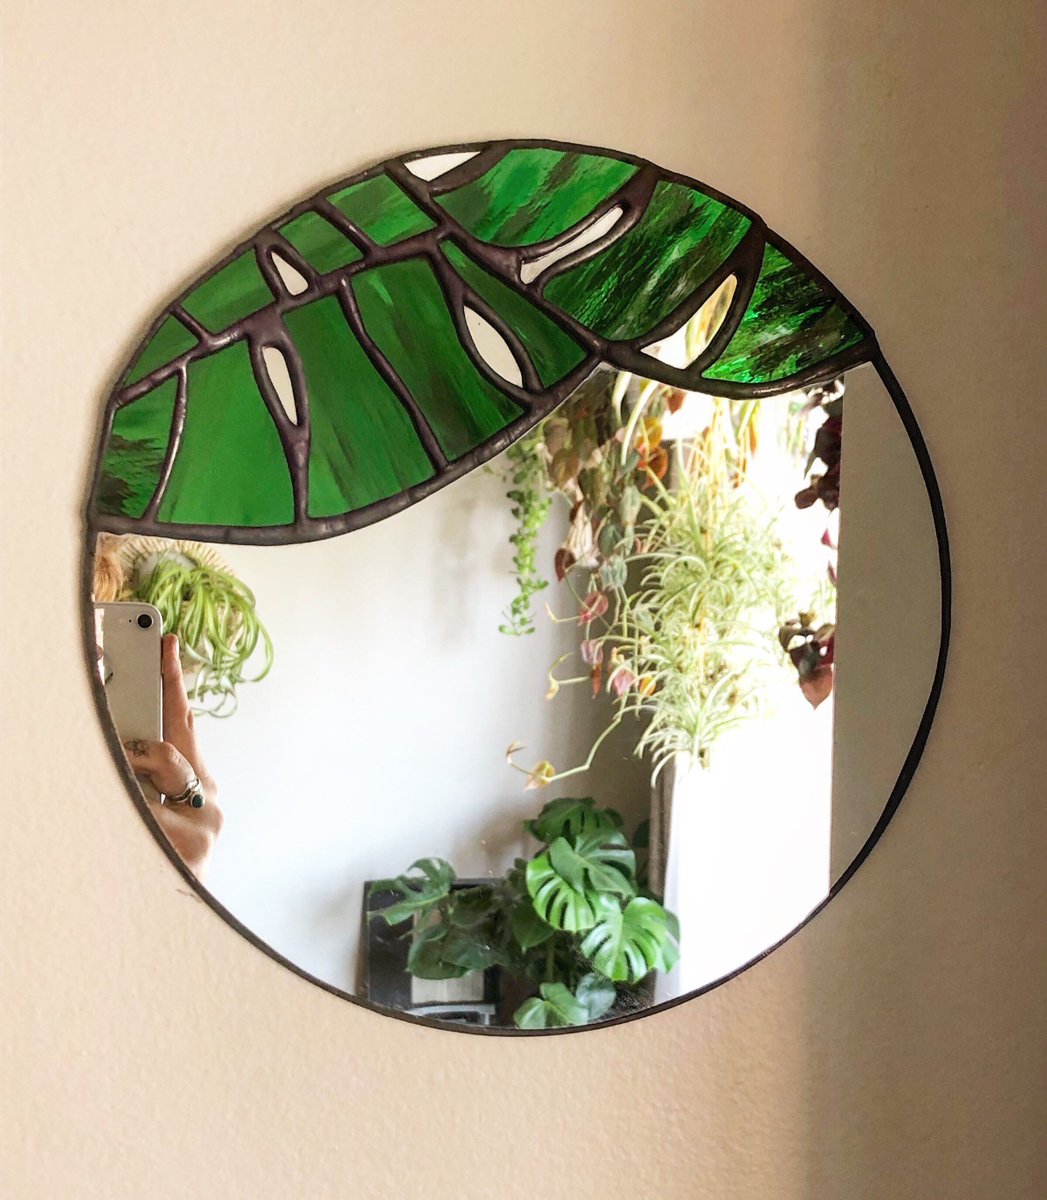 Stained glass + monstera leaves + circular mirrors. 